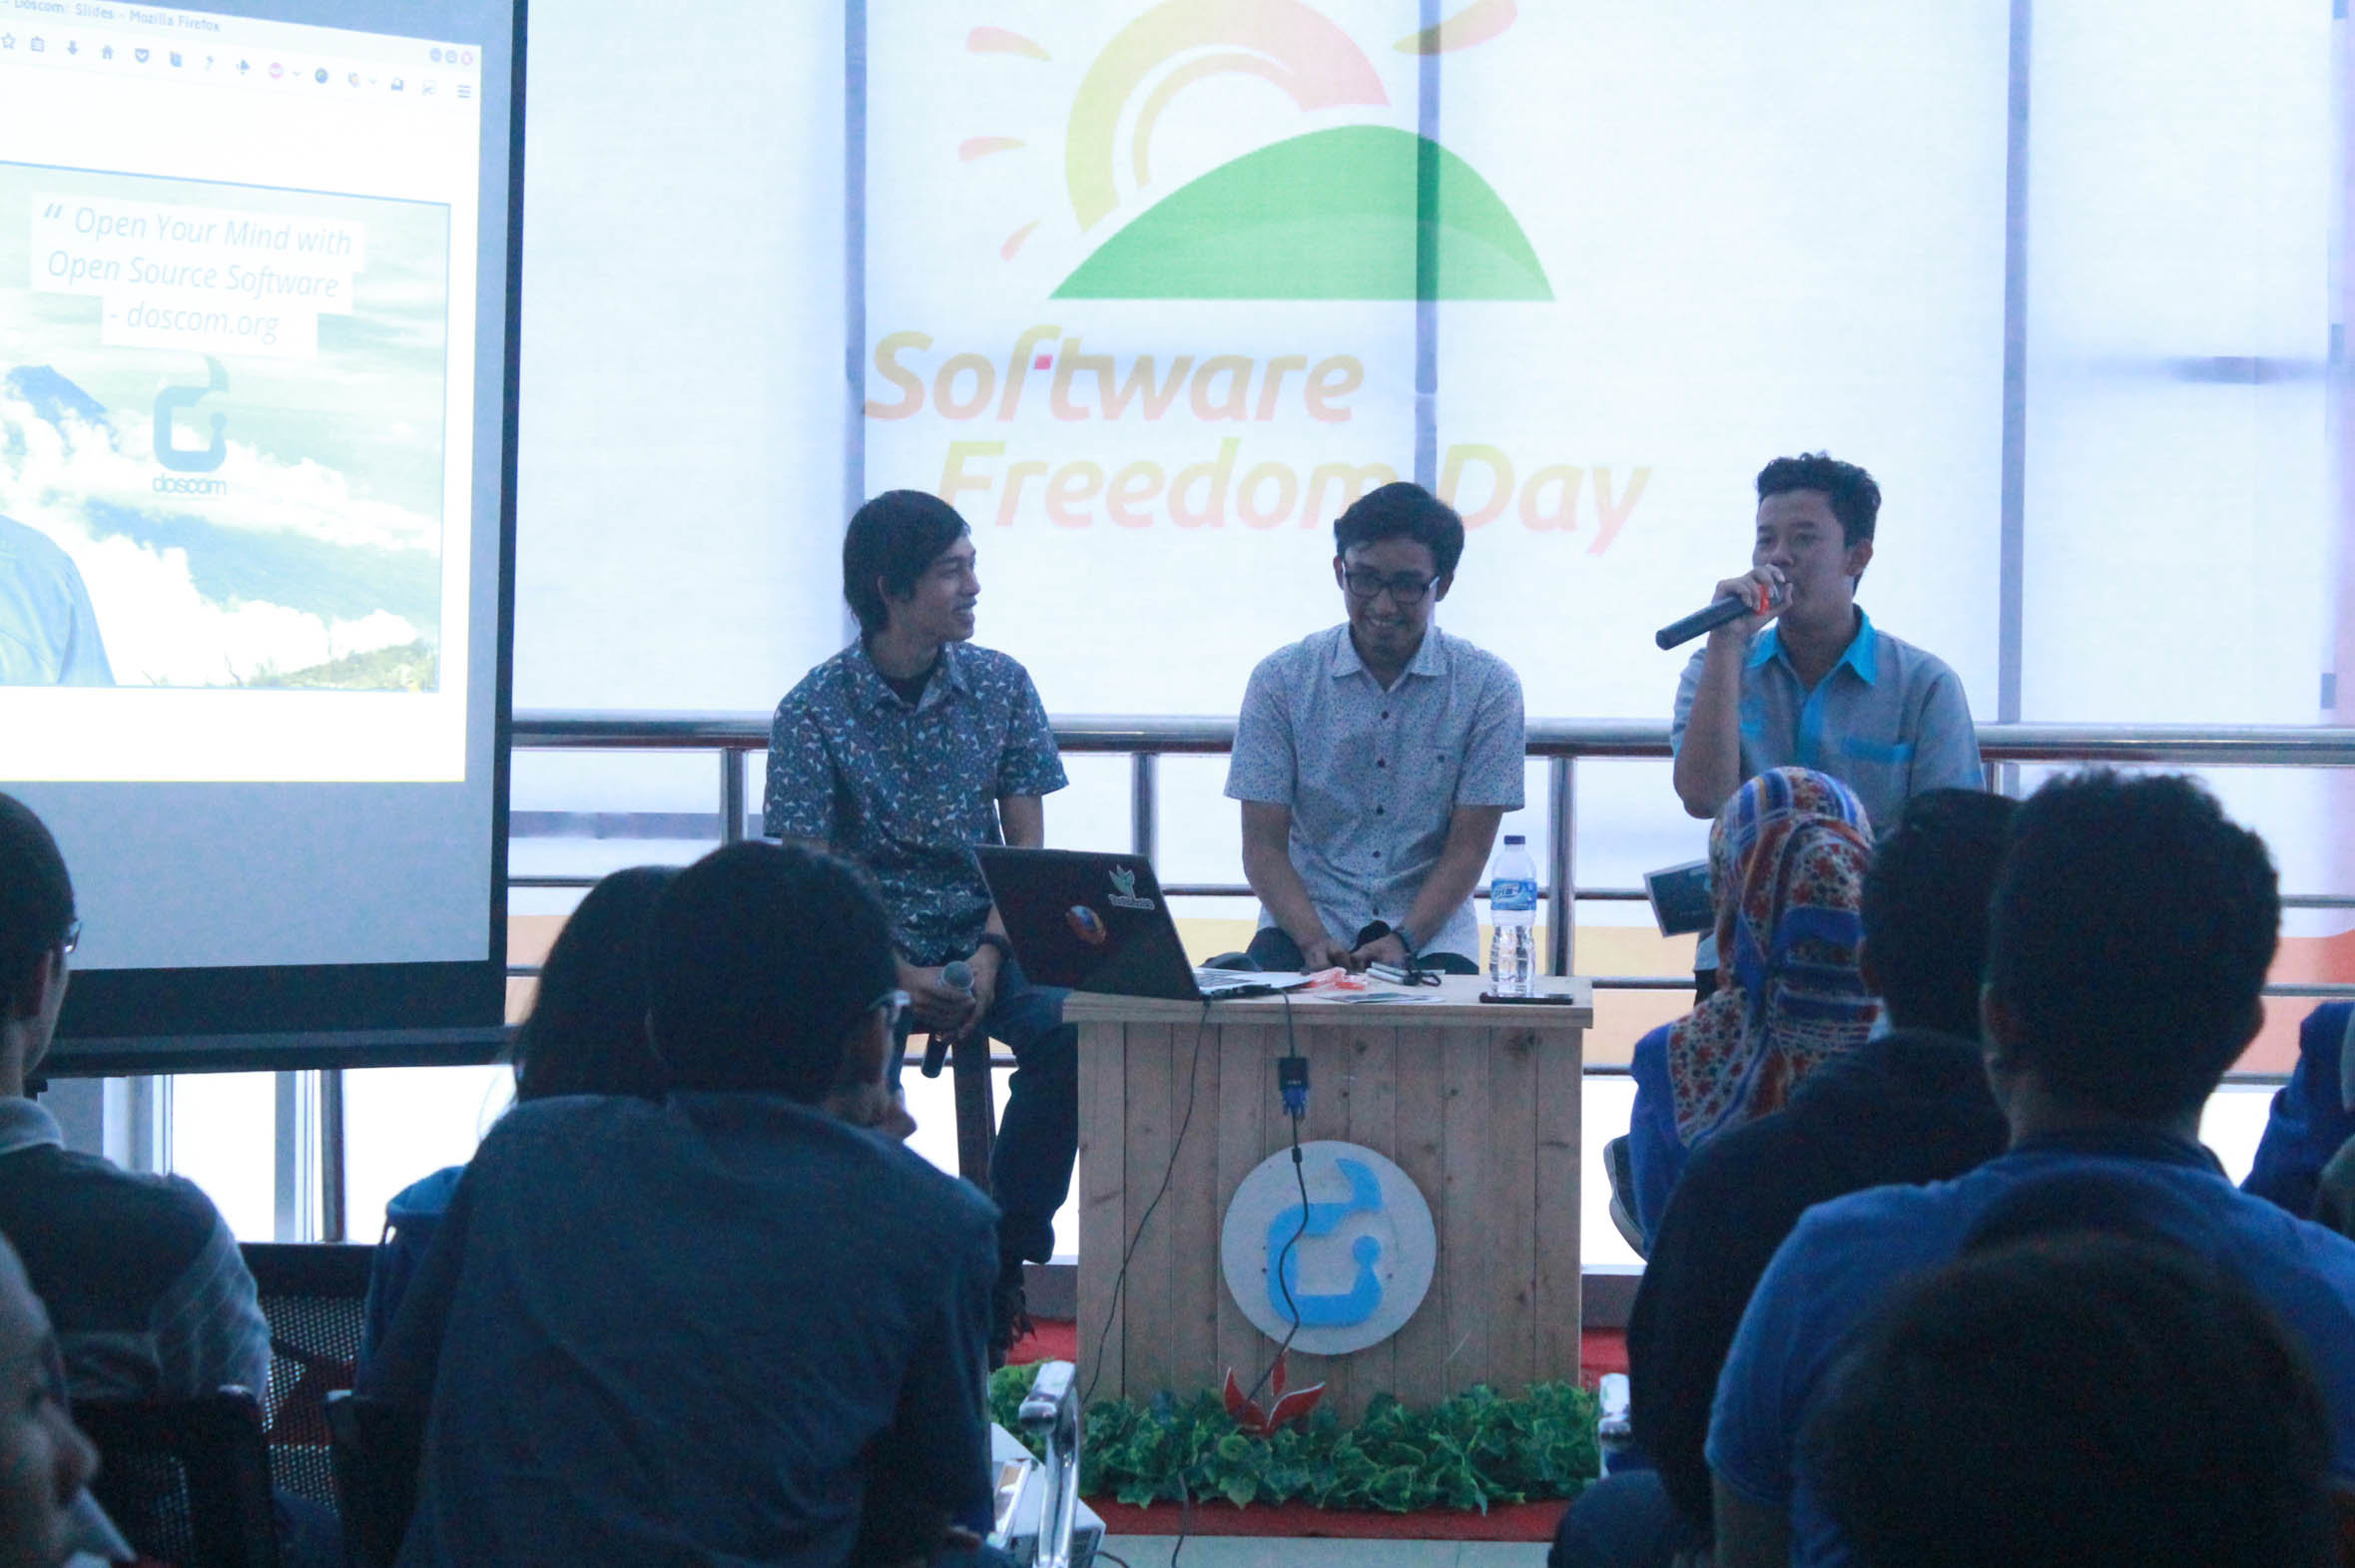 Talkshow Software Freedom Day